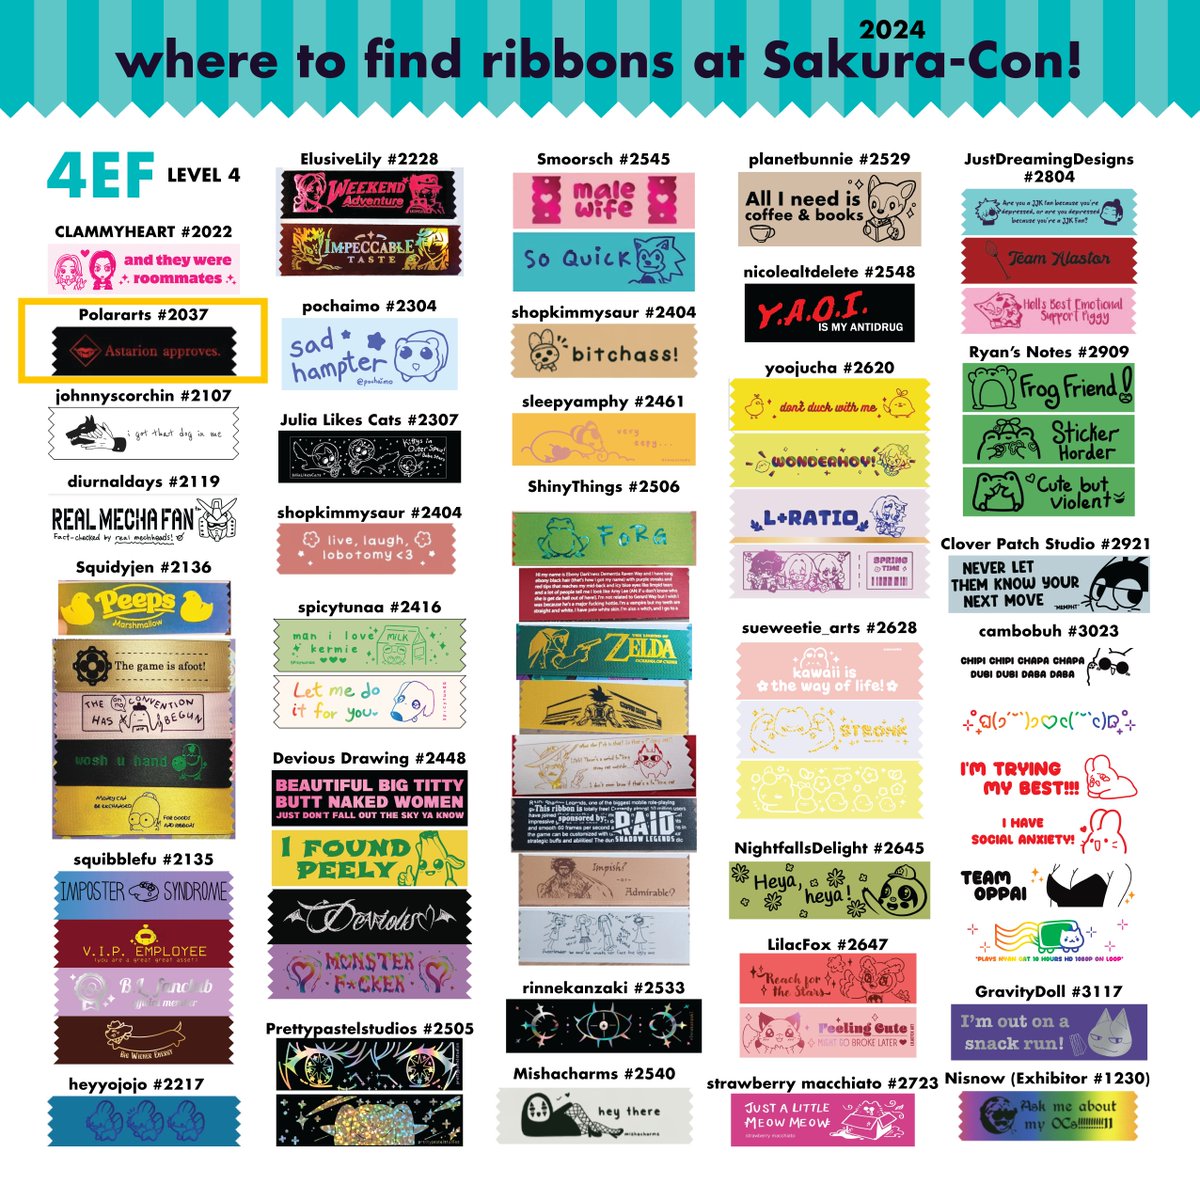 I'll be at #sakuracon2024 this weekend. Arch building, 4th Floor, Table 2037. Get your 'Astarion Approves' ribbon from me With bg3 purchase of $15 or more Or just $2! While supplies last.